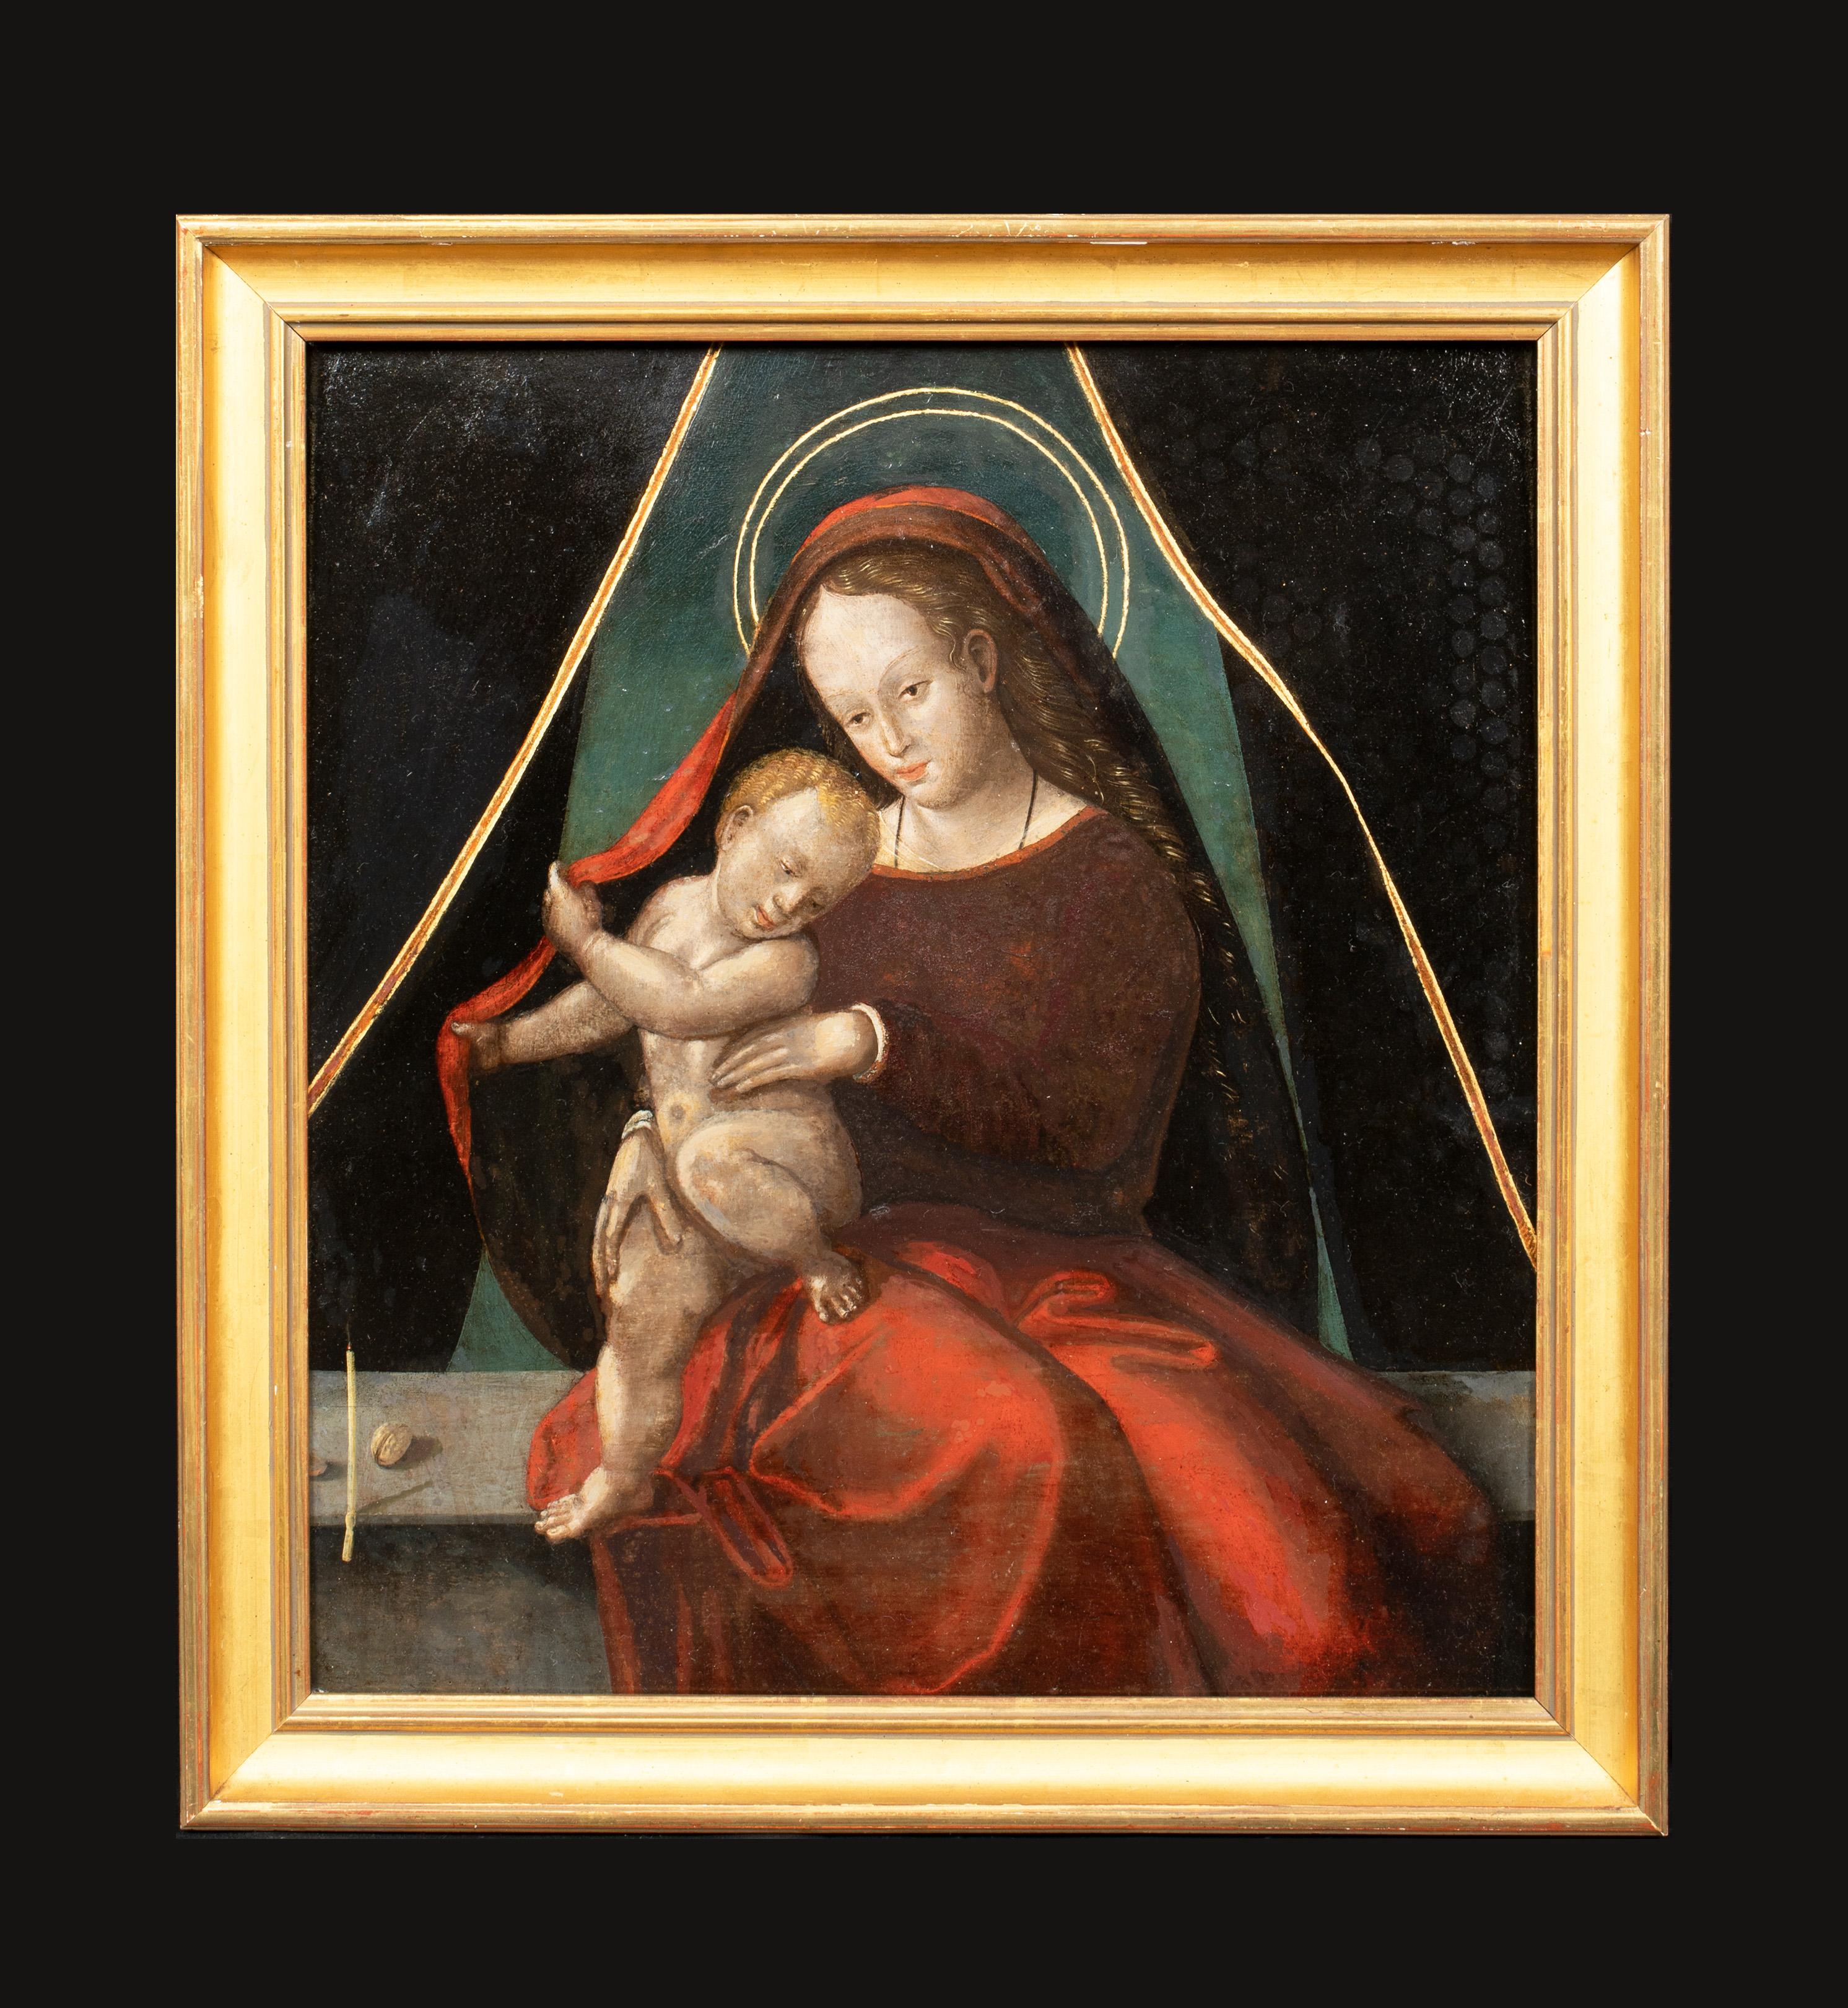 Madonna & Child, 16th 17th Century  - Painting by Unknown